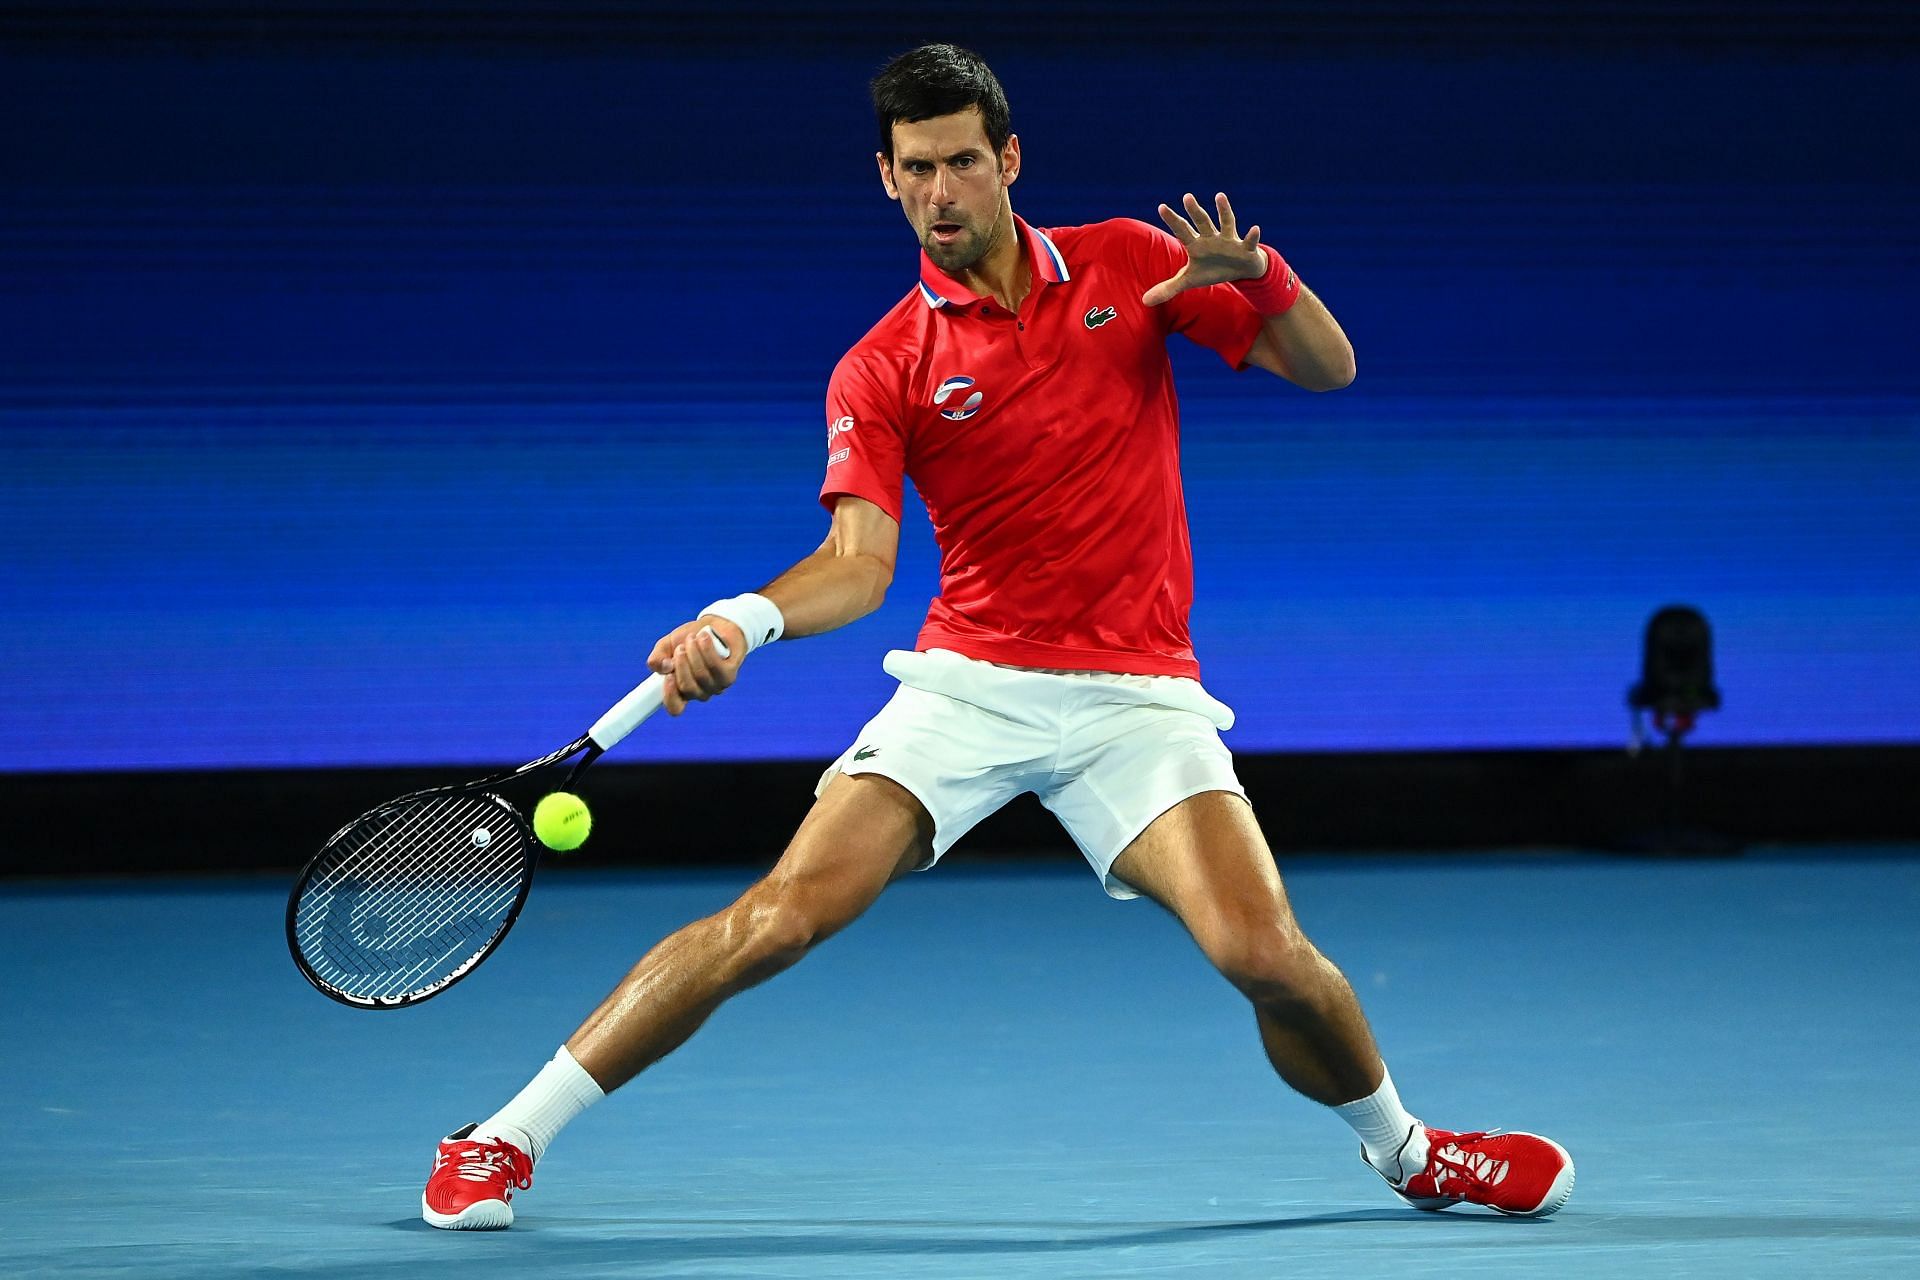 Novak Djokovic has confirmed his participation in the 2022 Laver Cup.